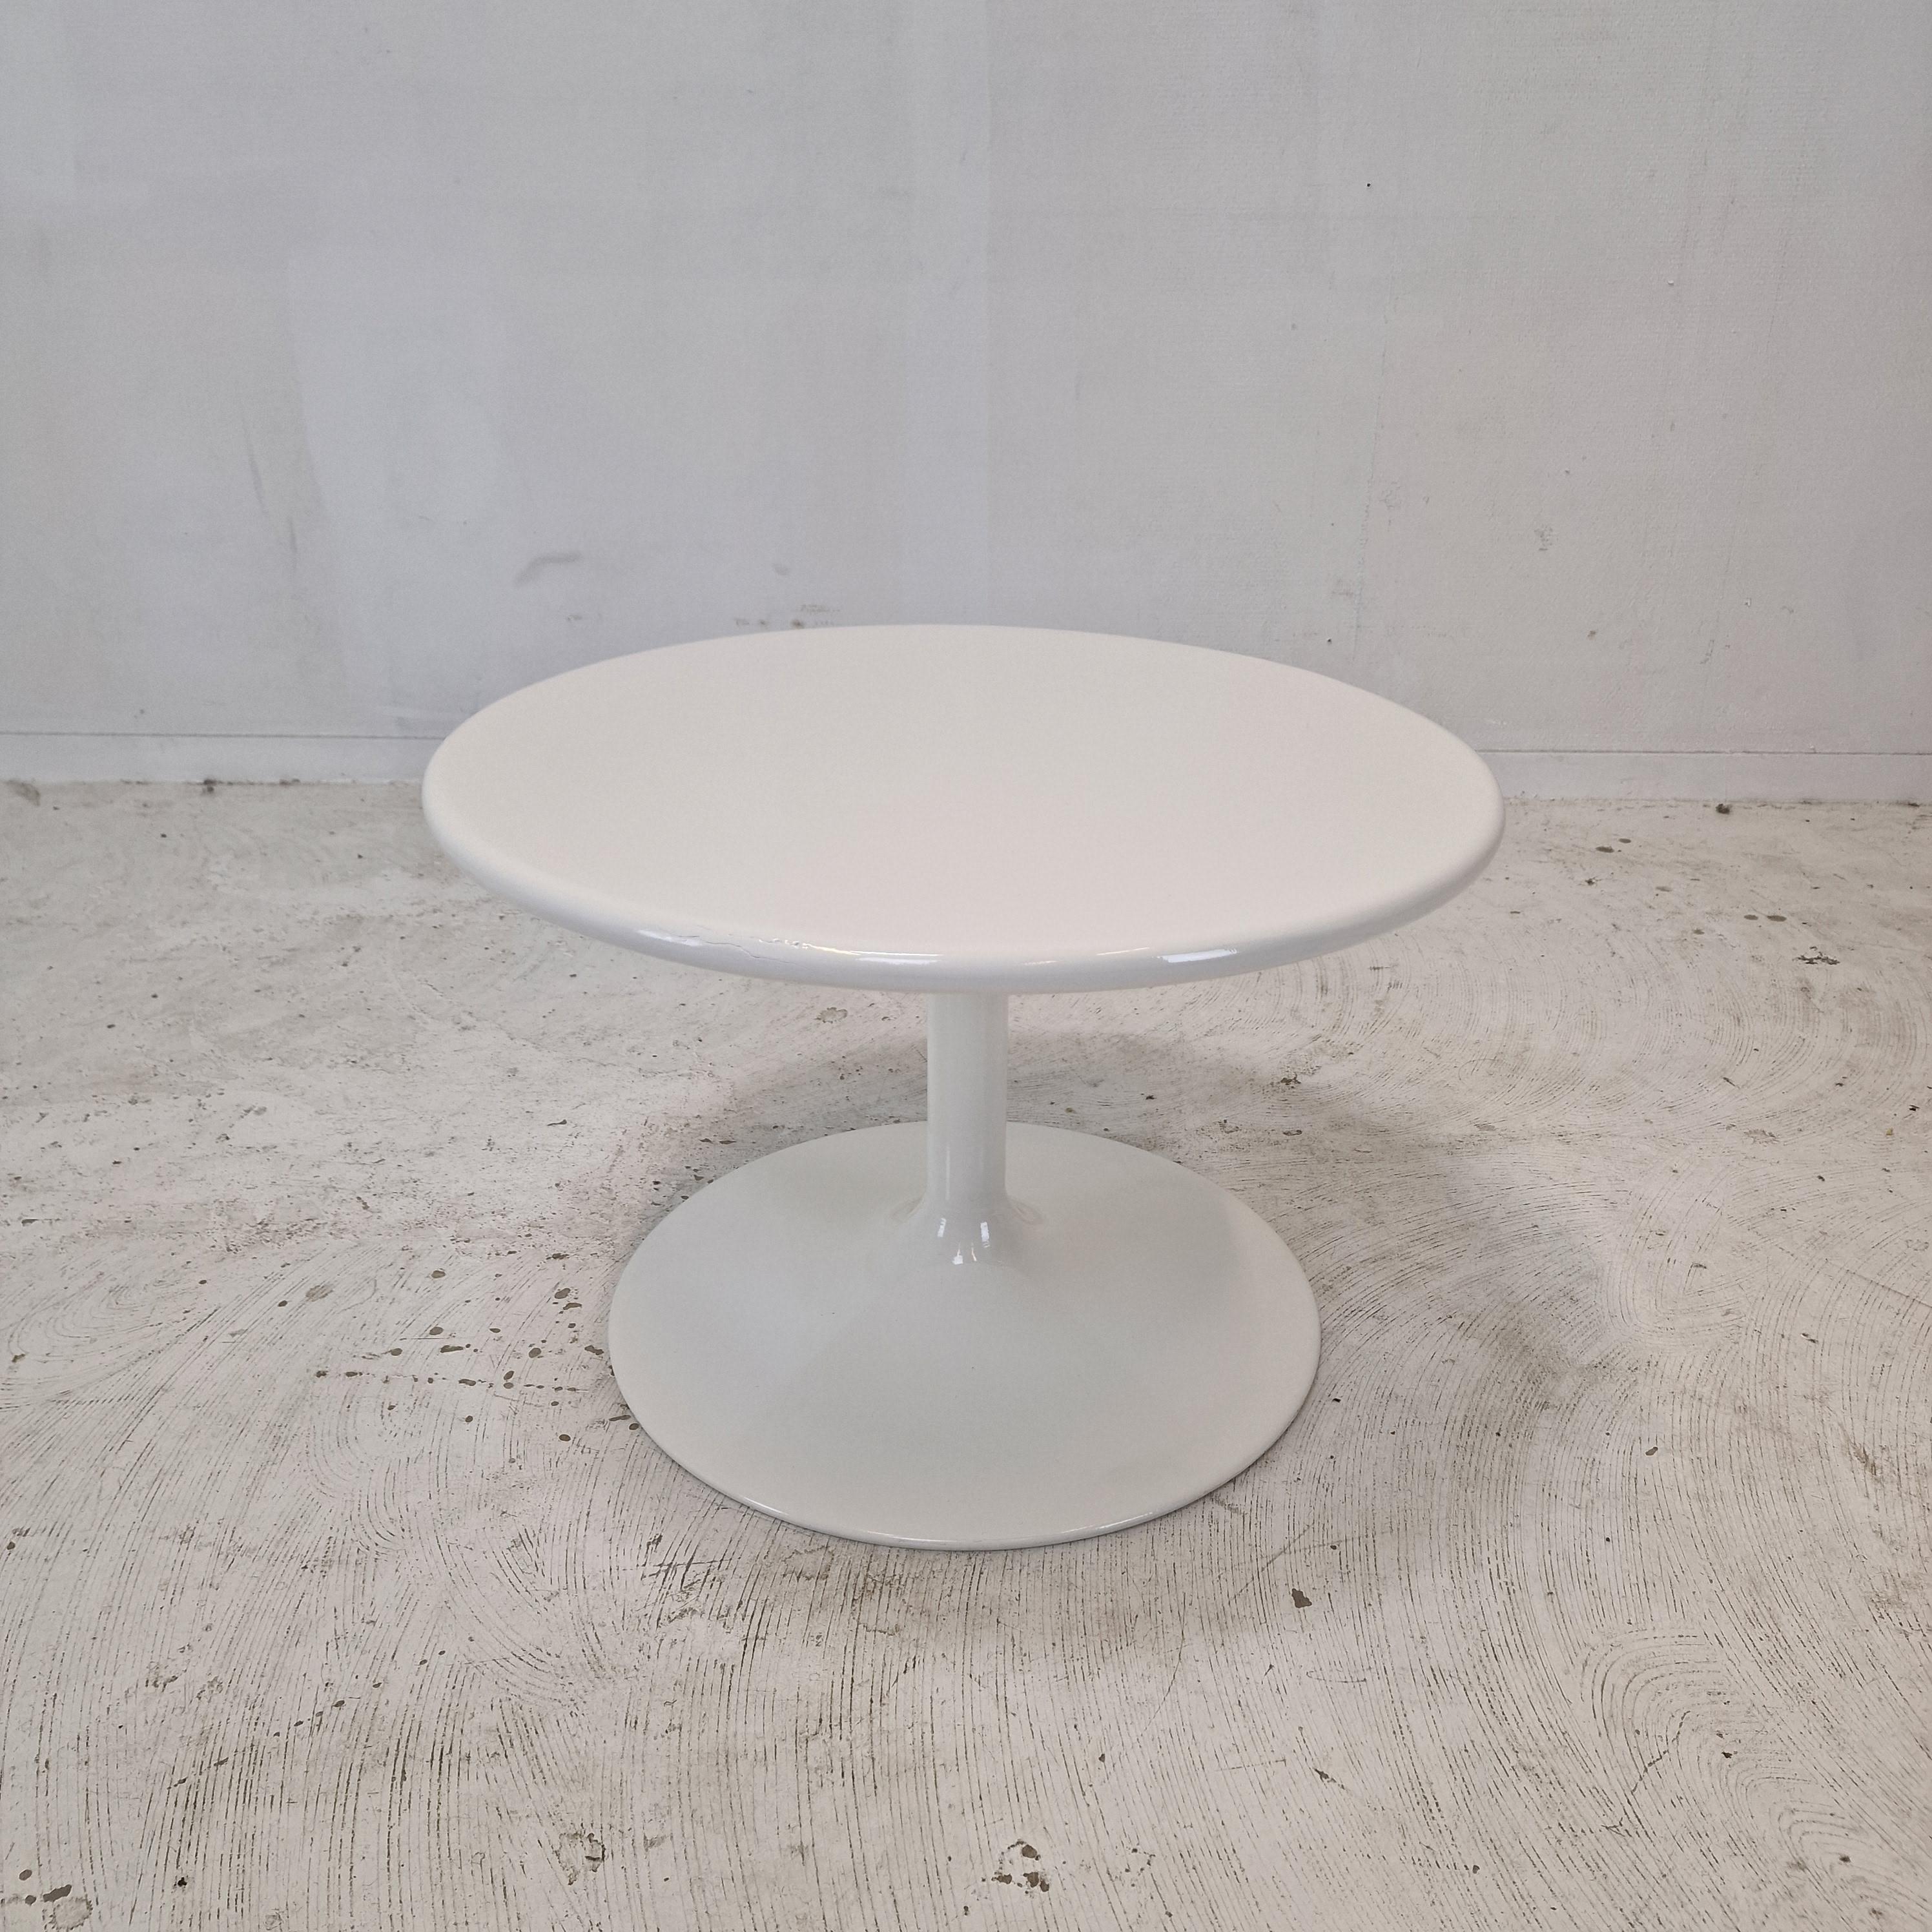 Very nice round coffee table, designed by Pierre Paulin in the 70's. 
The name of the table is 